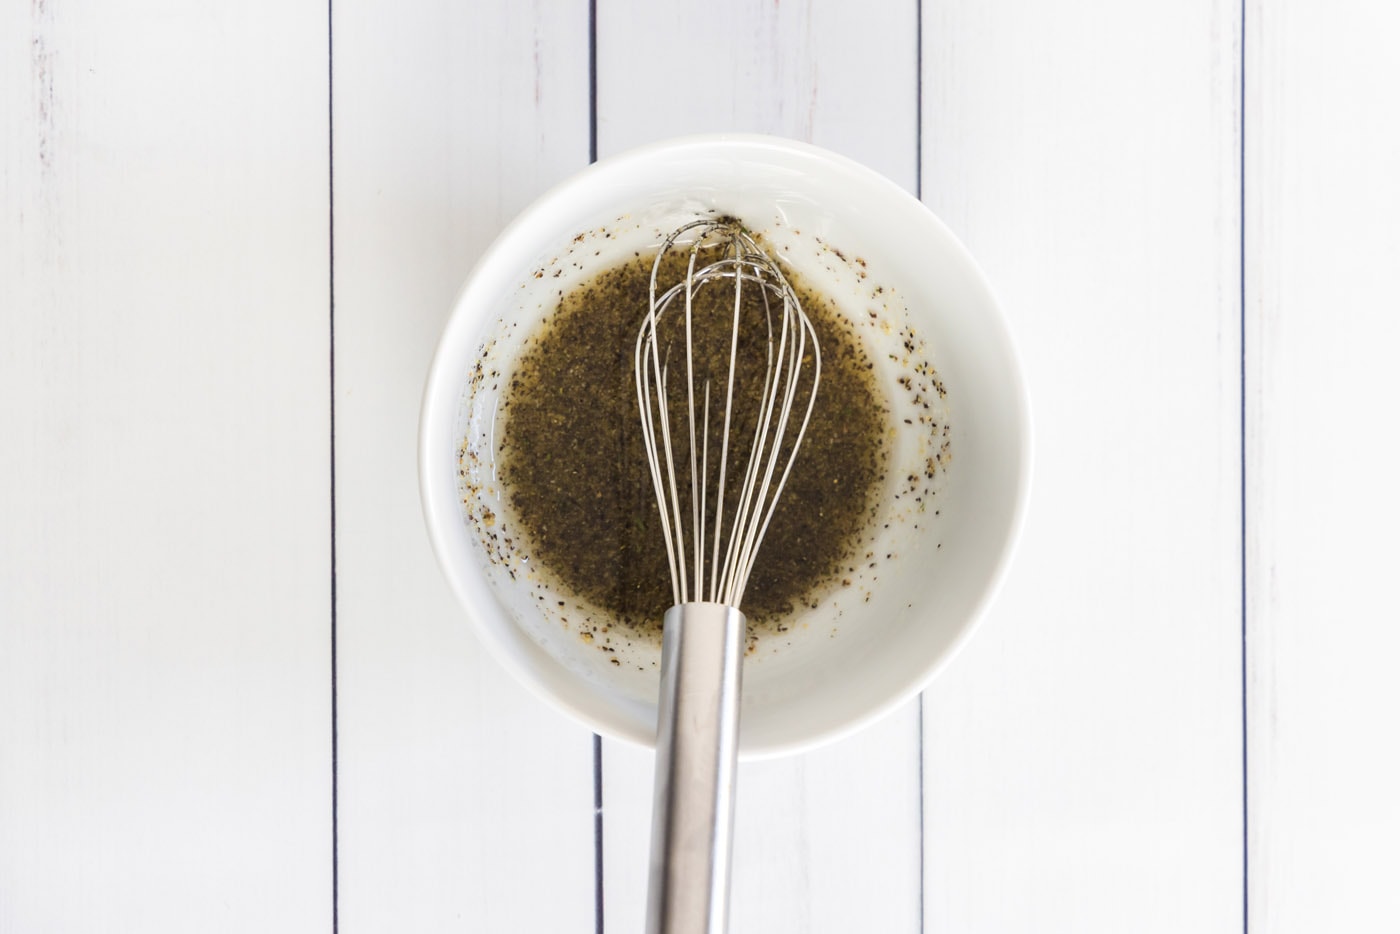 whisking olive oil, salt, and pepper in a bowl